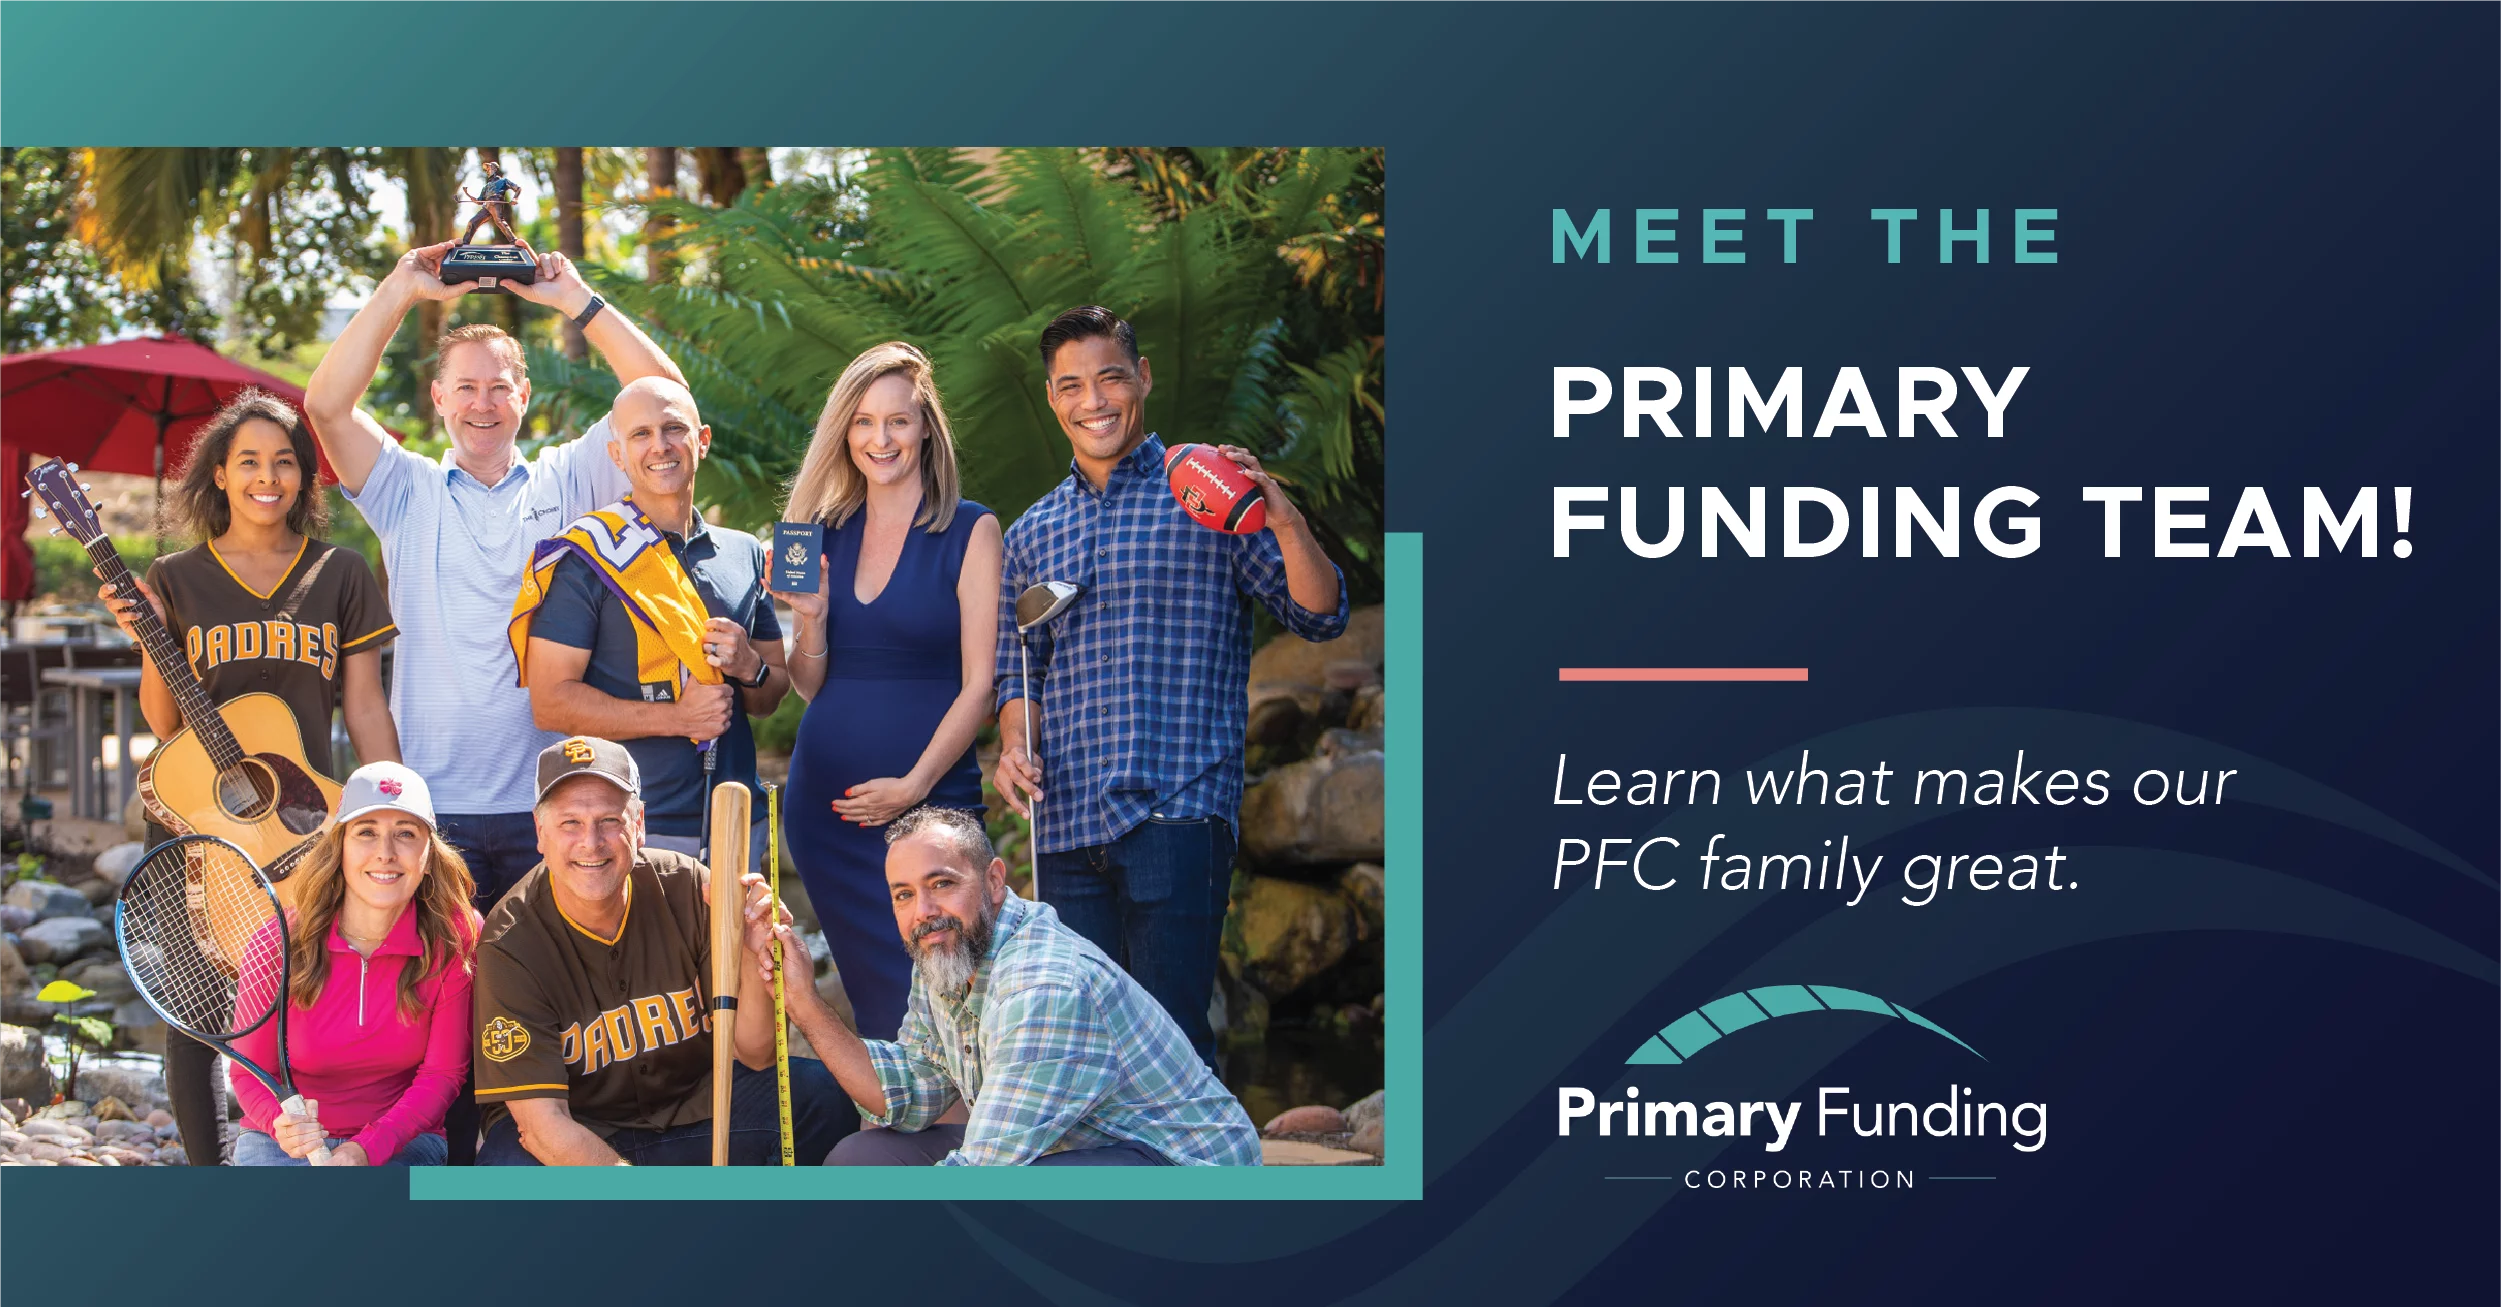 Meet the Primary Funding Team post image